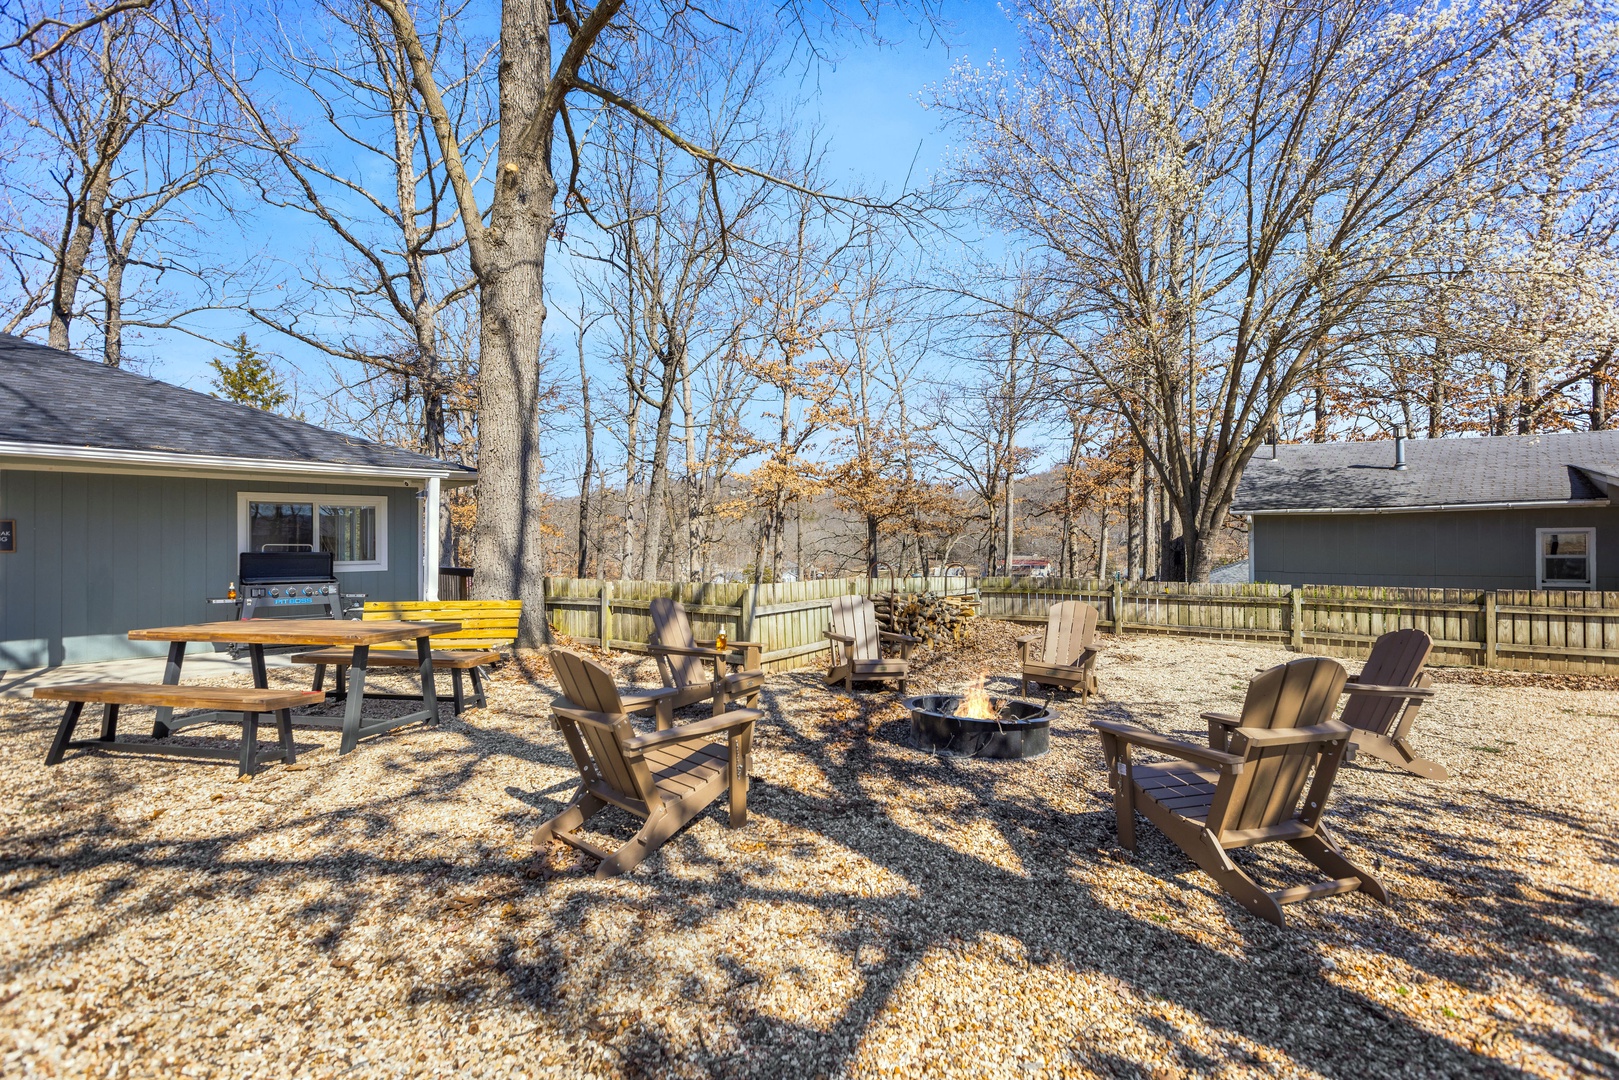 Lounge in the Adirondack chairs & create cherished fireside moments